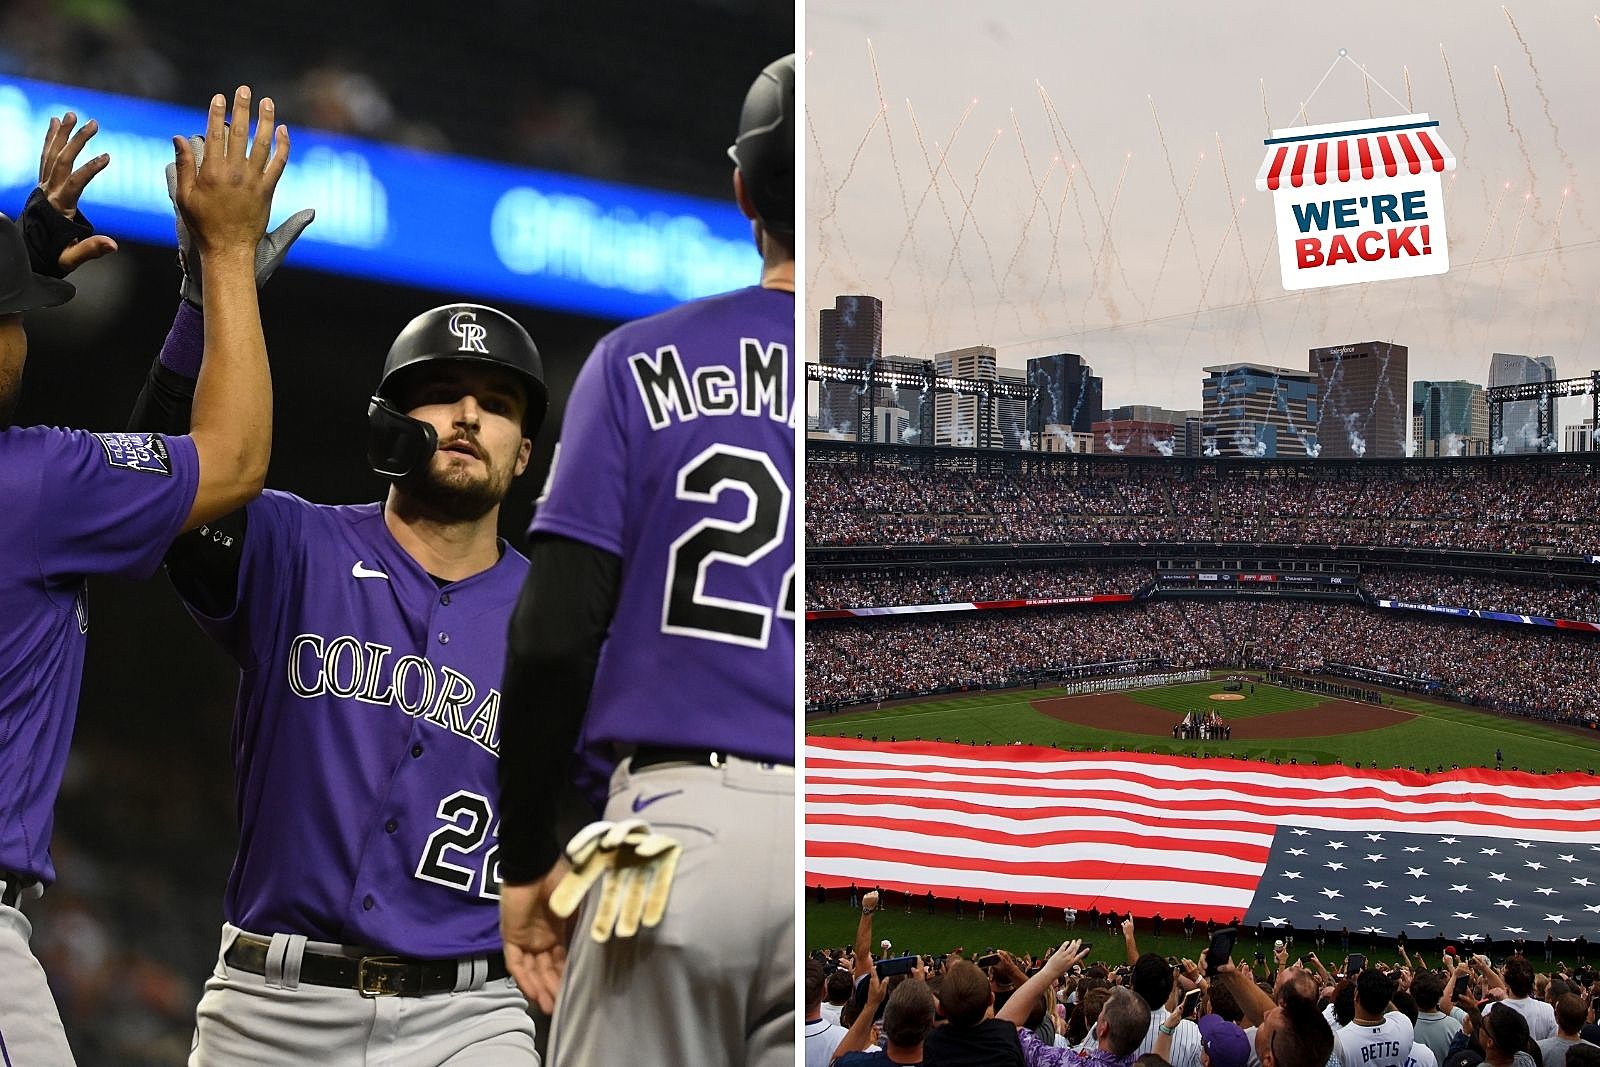 Rockies Baseball Is Back As Lockout Ends. When's Opening Day?